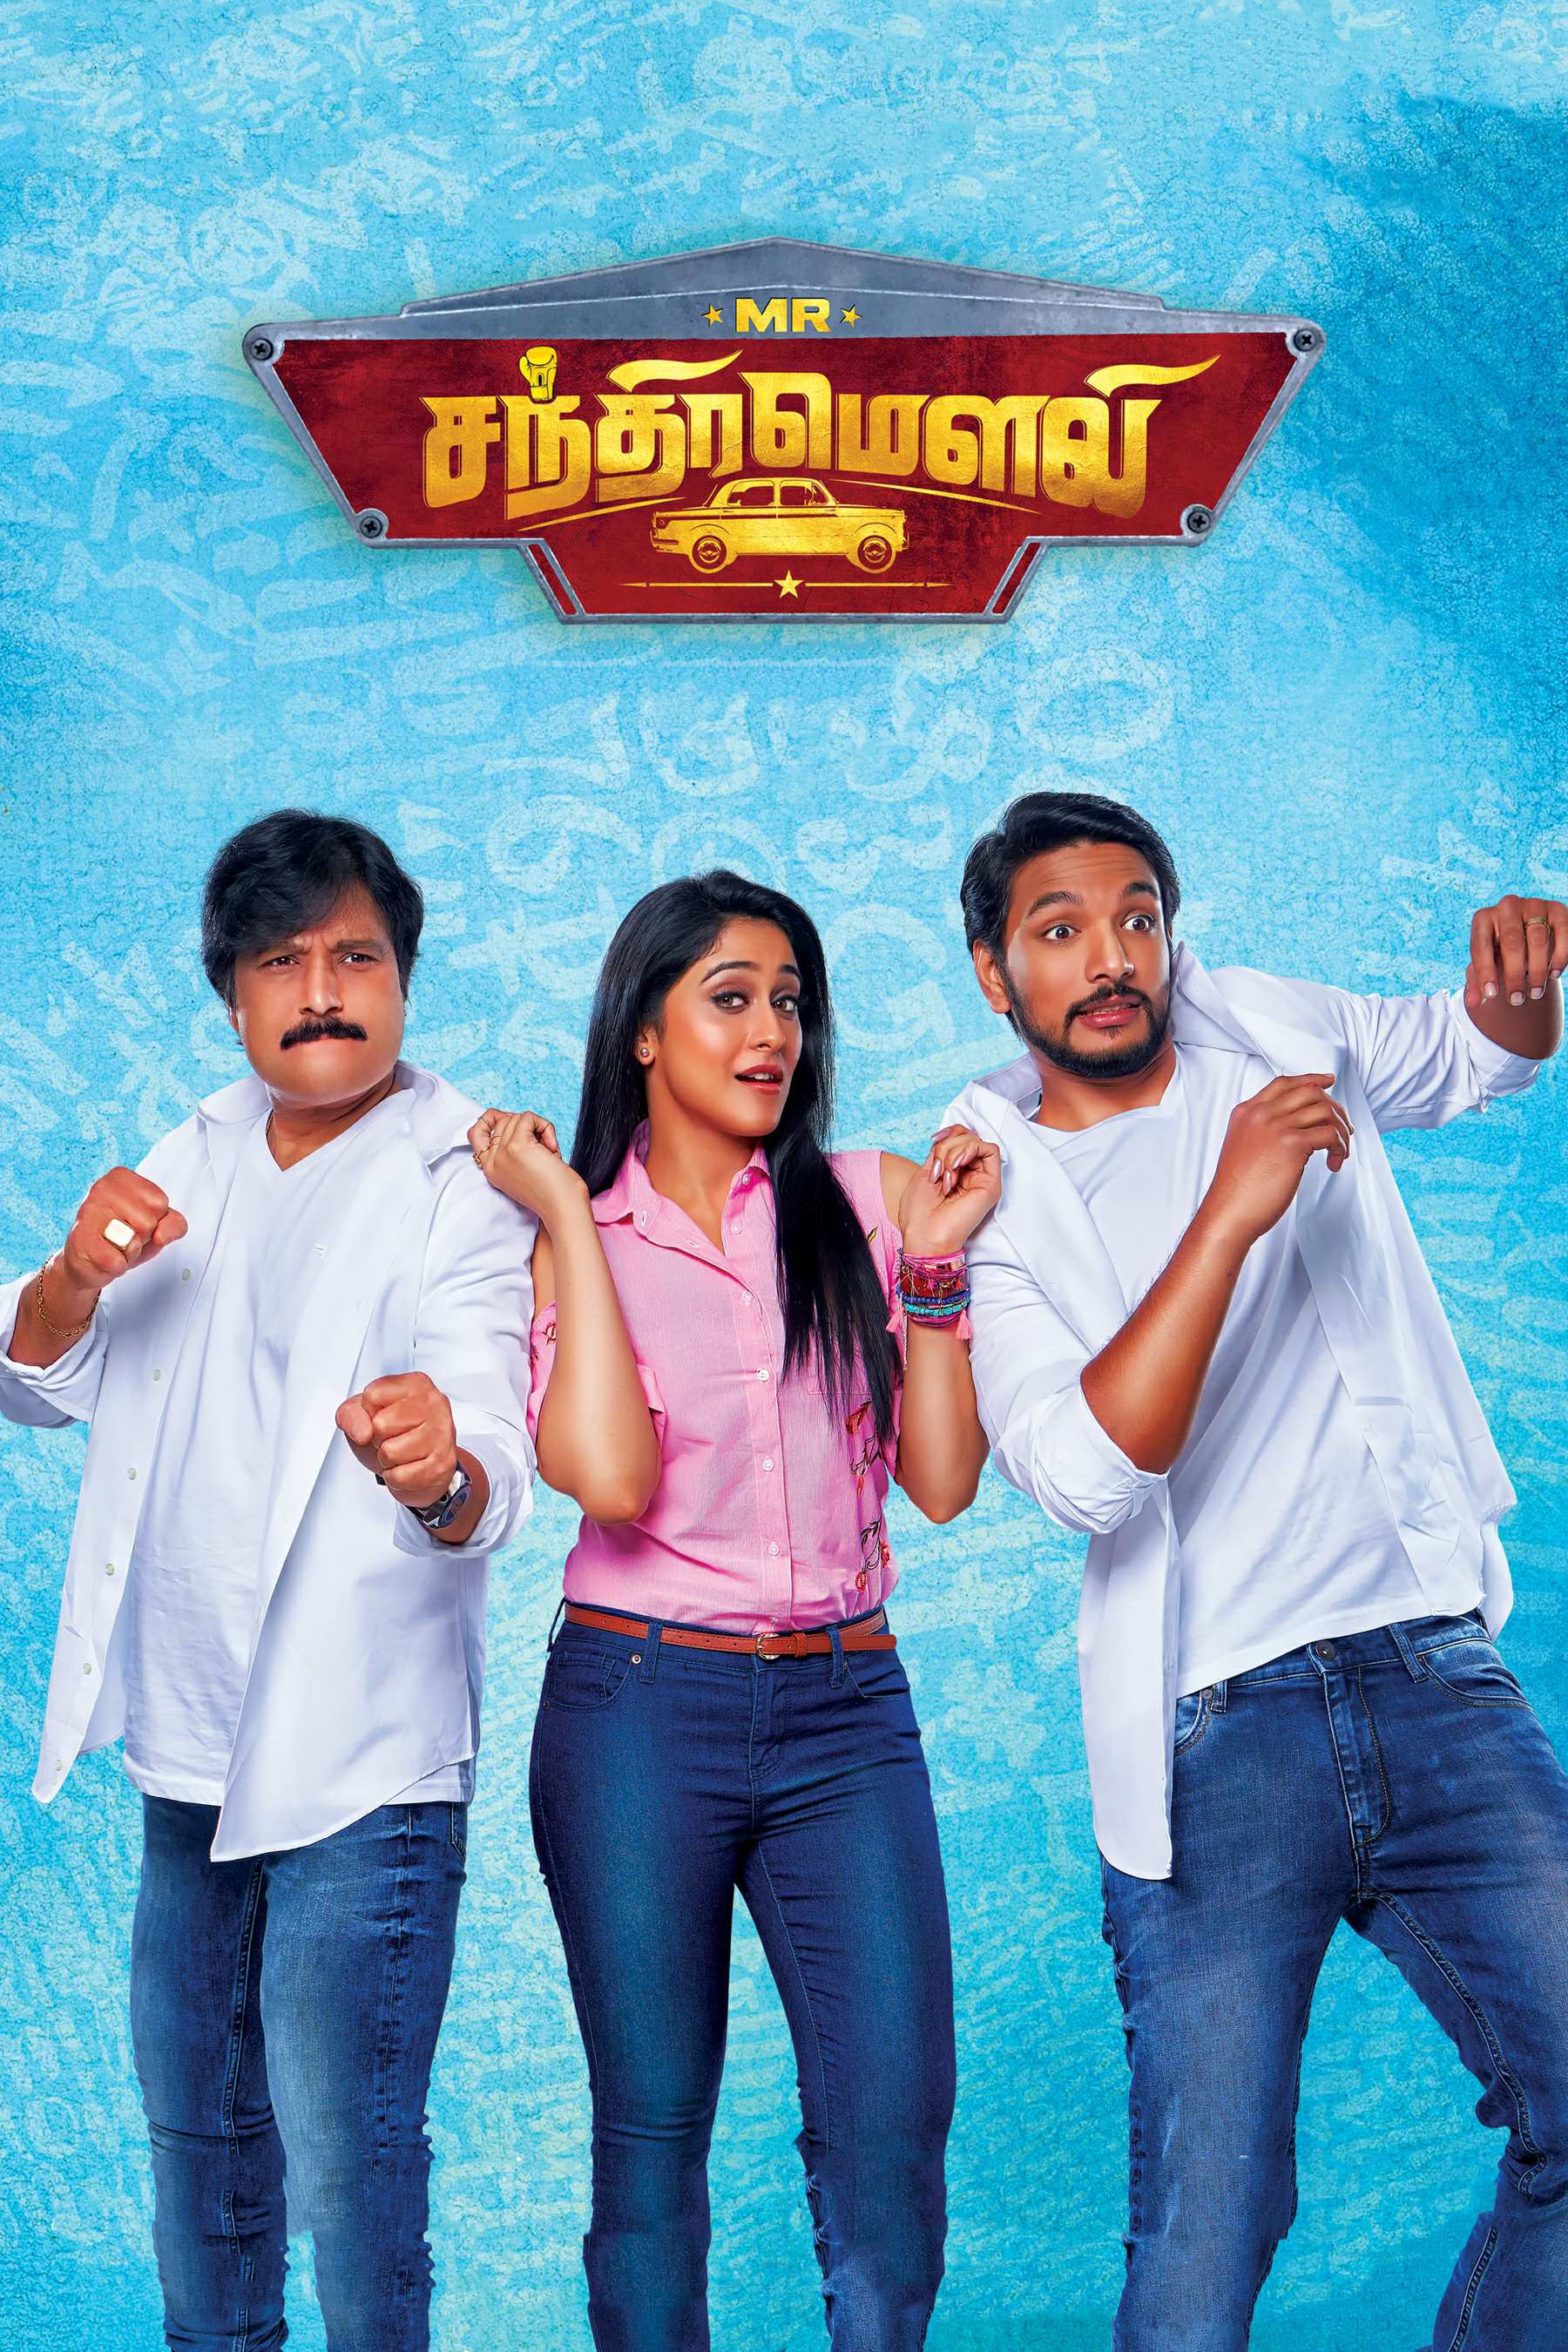 Poster for the movie "Mr. Chandramouli"